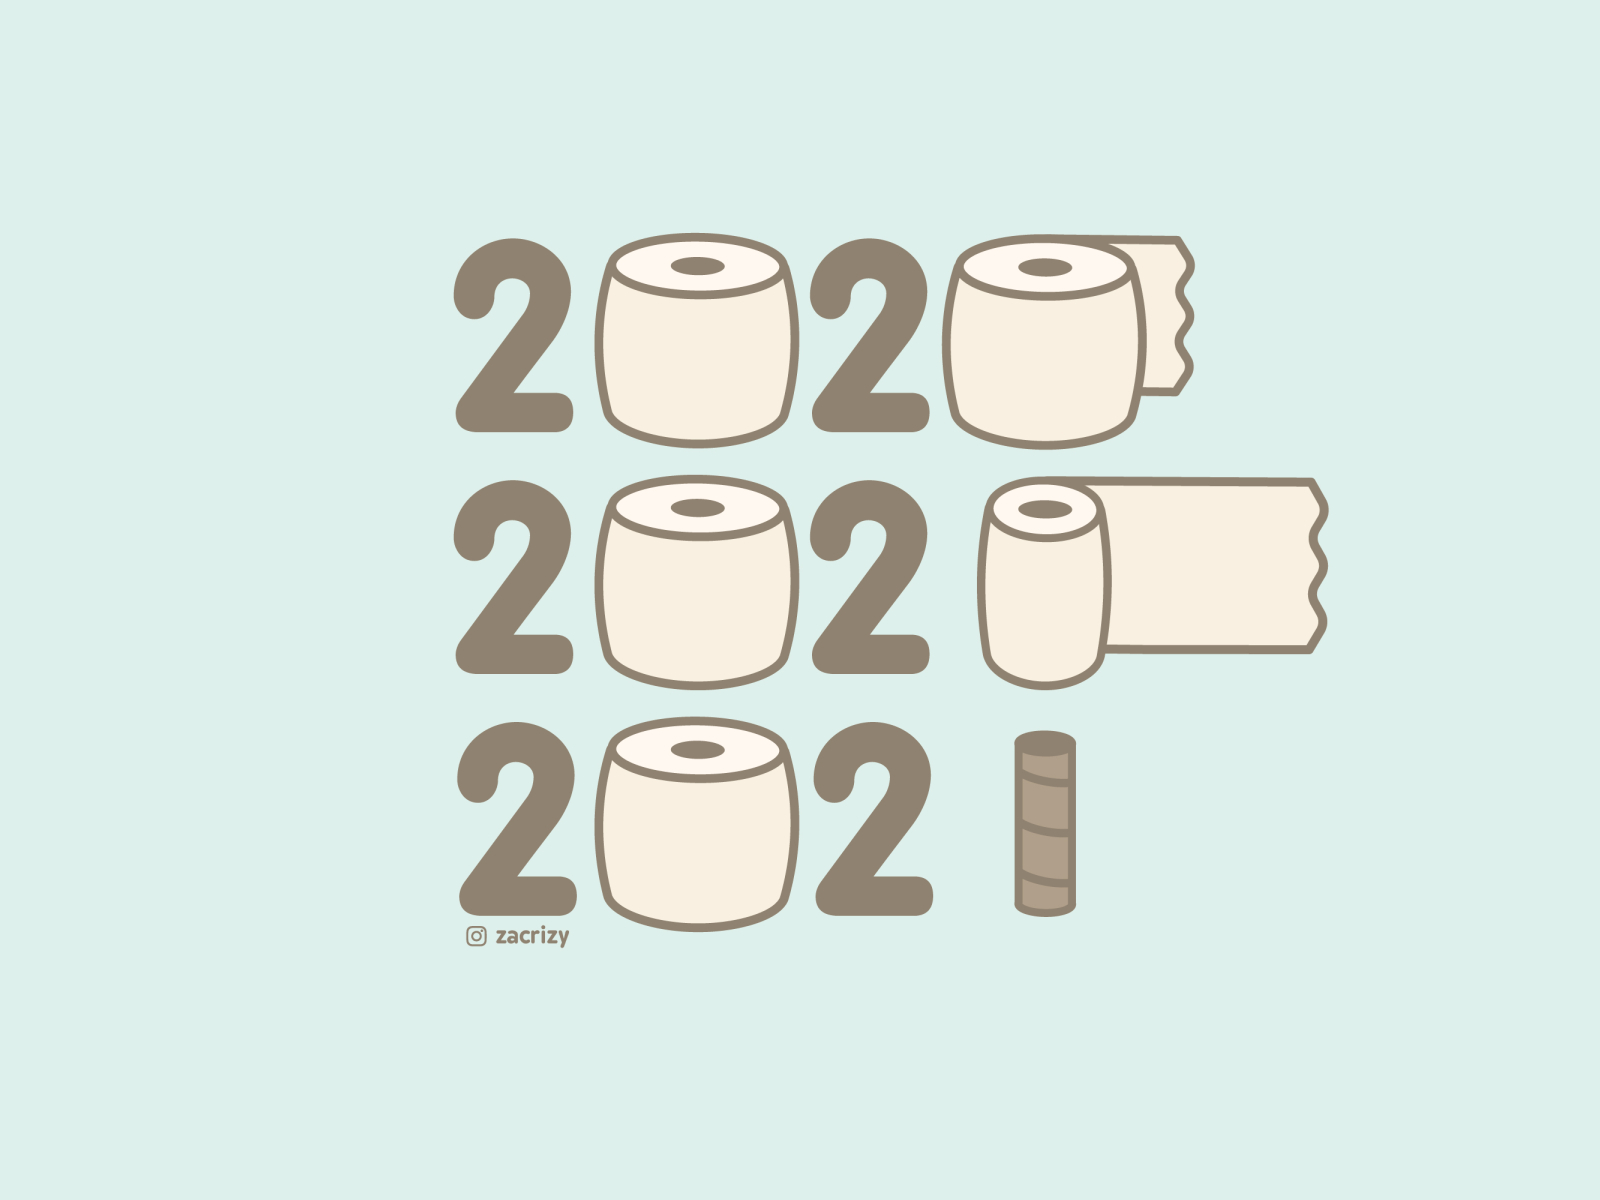 Bye 2020! 2020 2020 design 2021 cute design funny happy humor illustration minimal new year new year countdown pun toilet paper vector